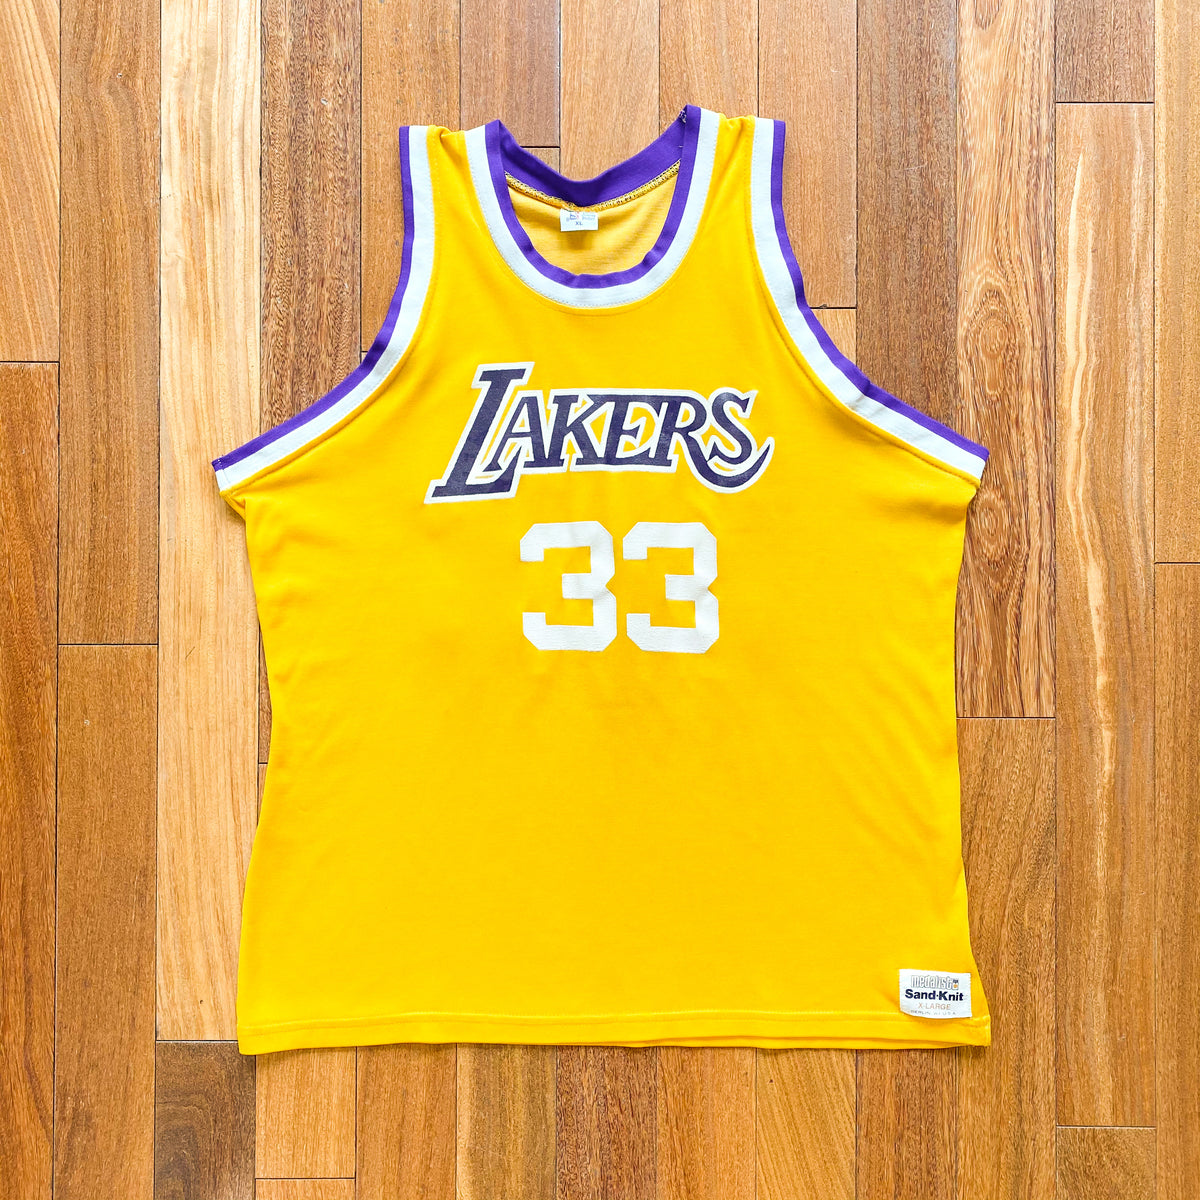 VINTAGE 80'S LOS ANGELES LAKERS NBA #33 SAND-KNIT PRINTED JERSEY – epitome.